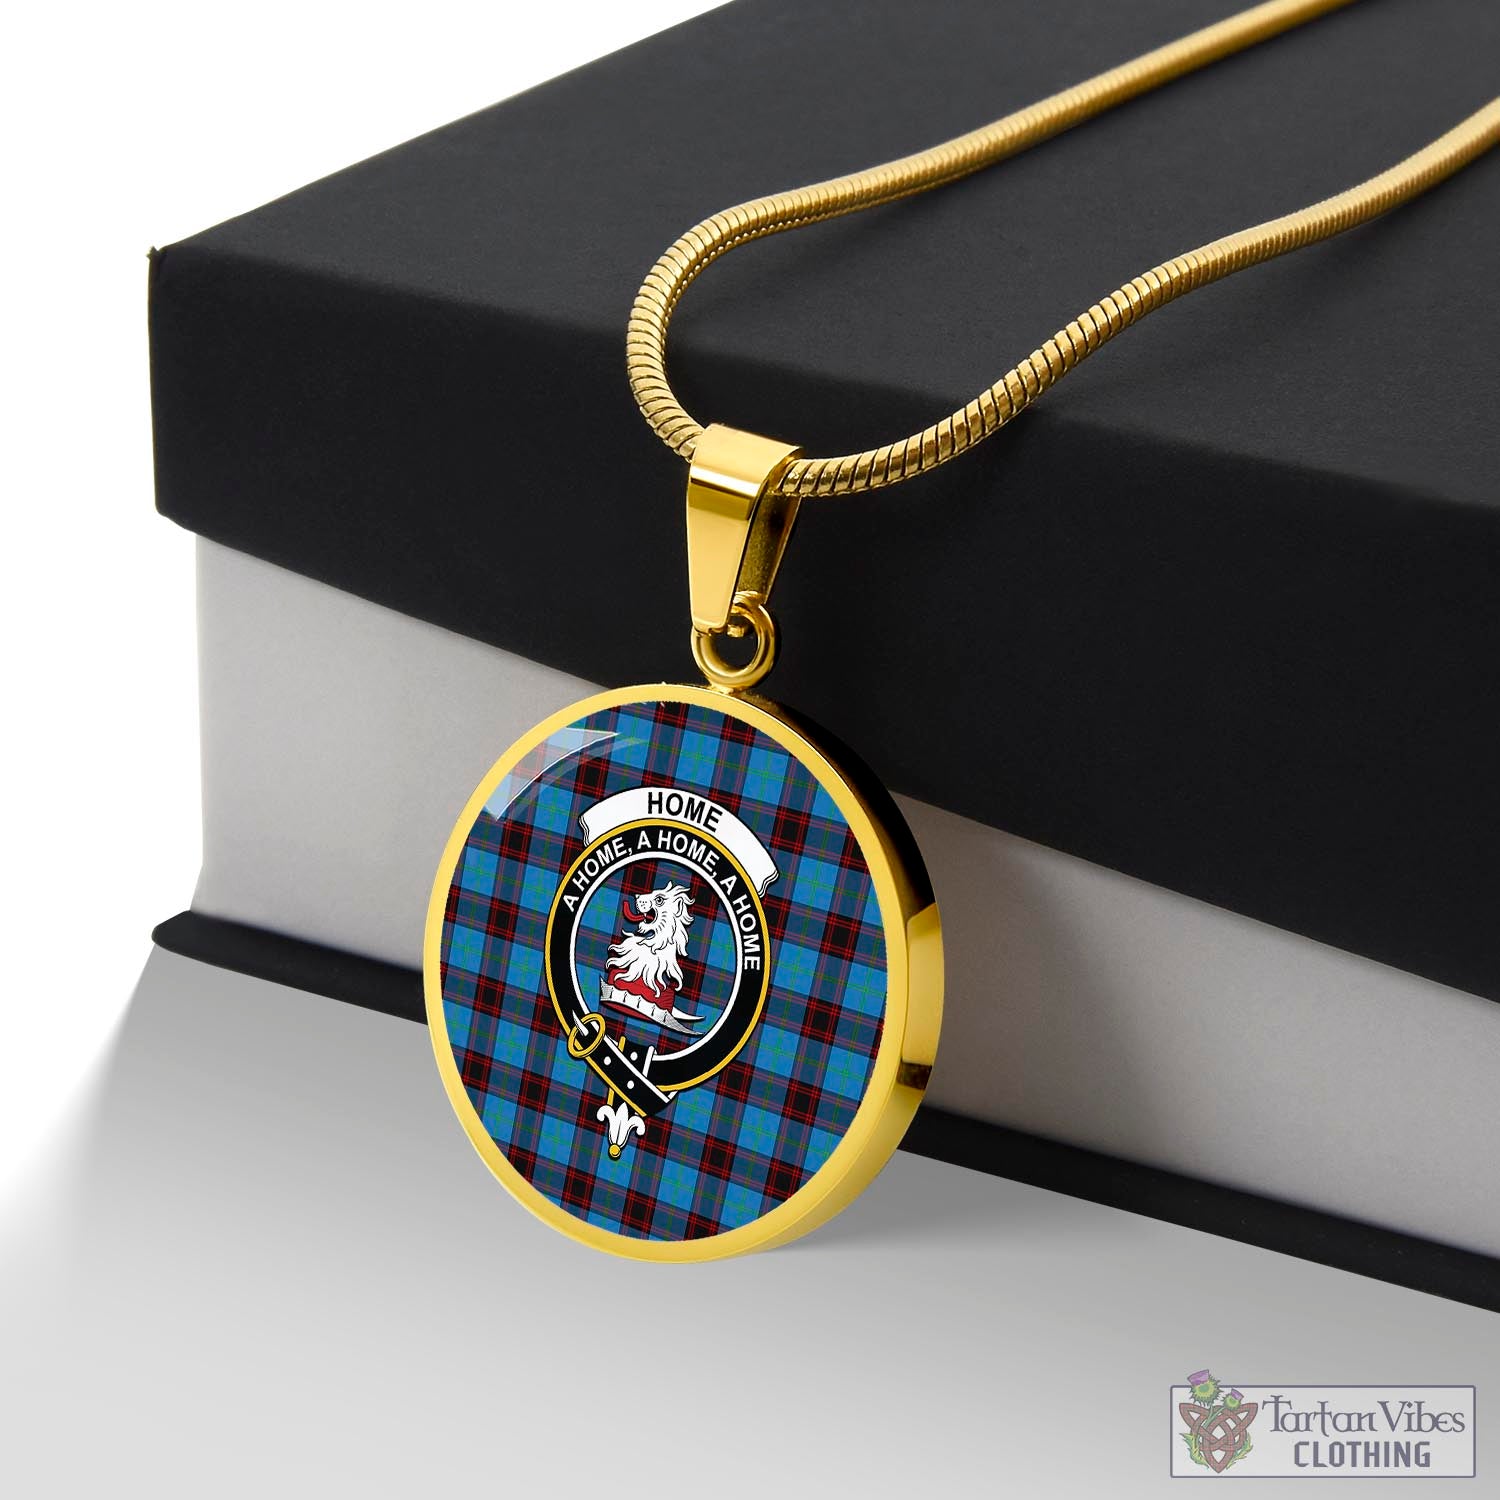 Tartan Vibes Clothing Home Ancient Tartan Circle Necklace with Family Crest